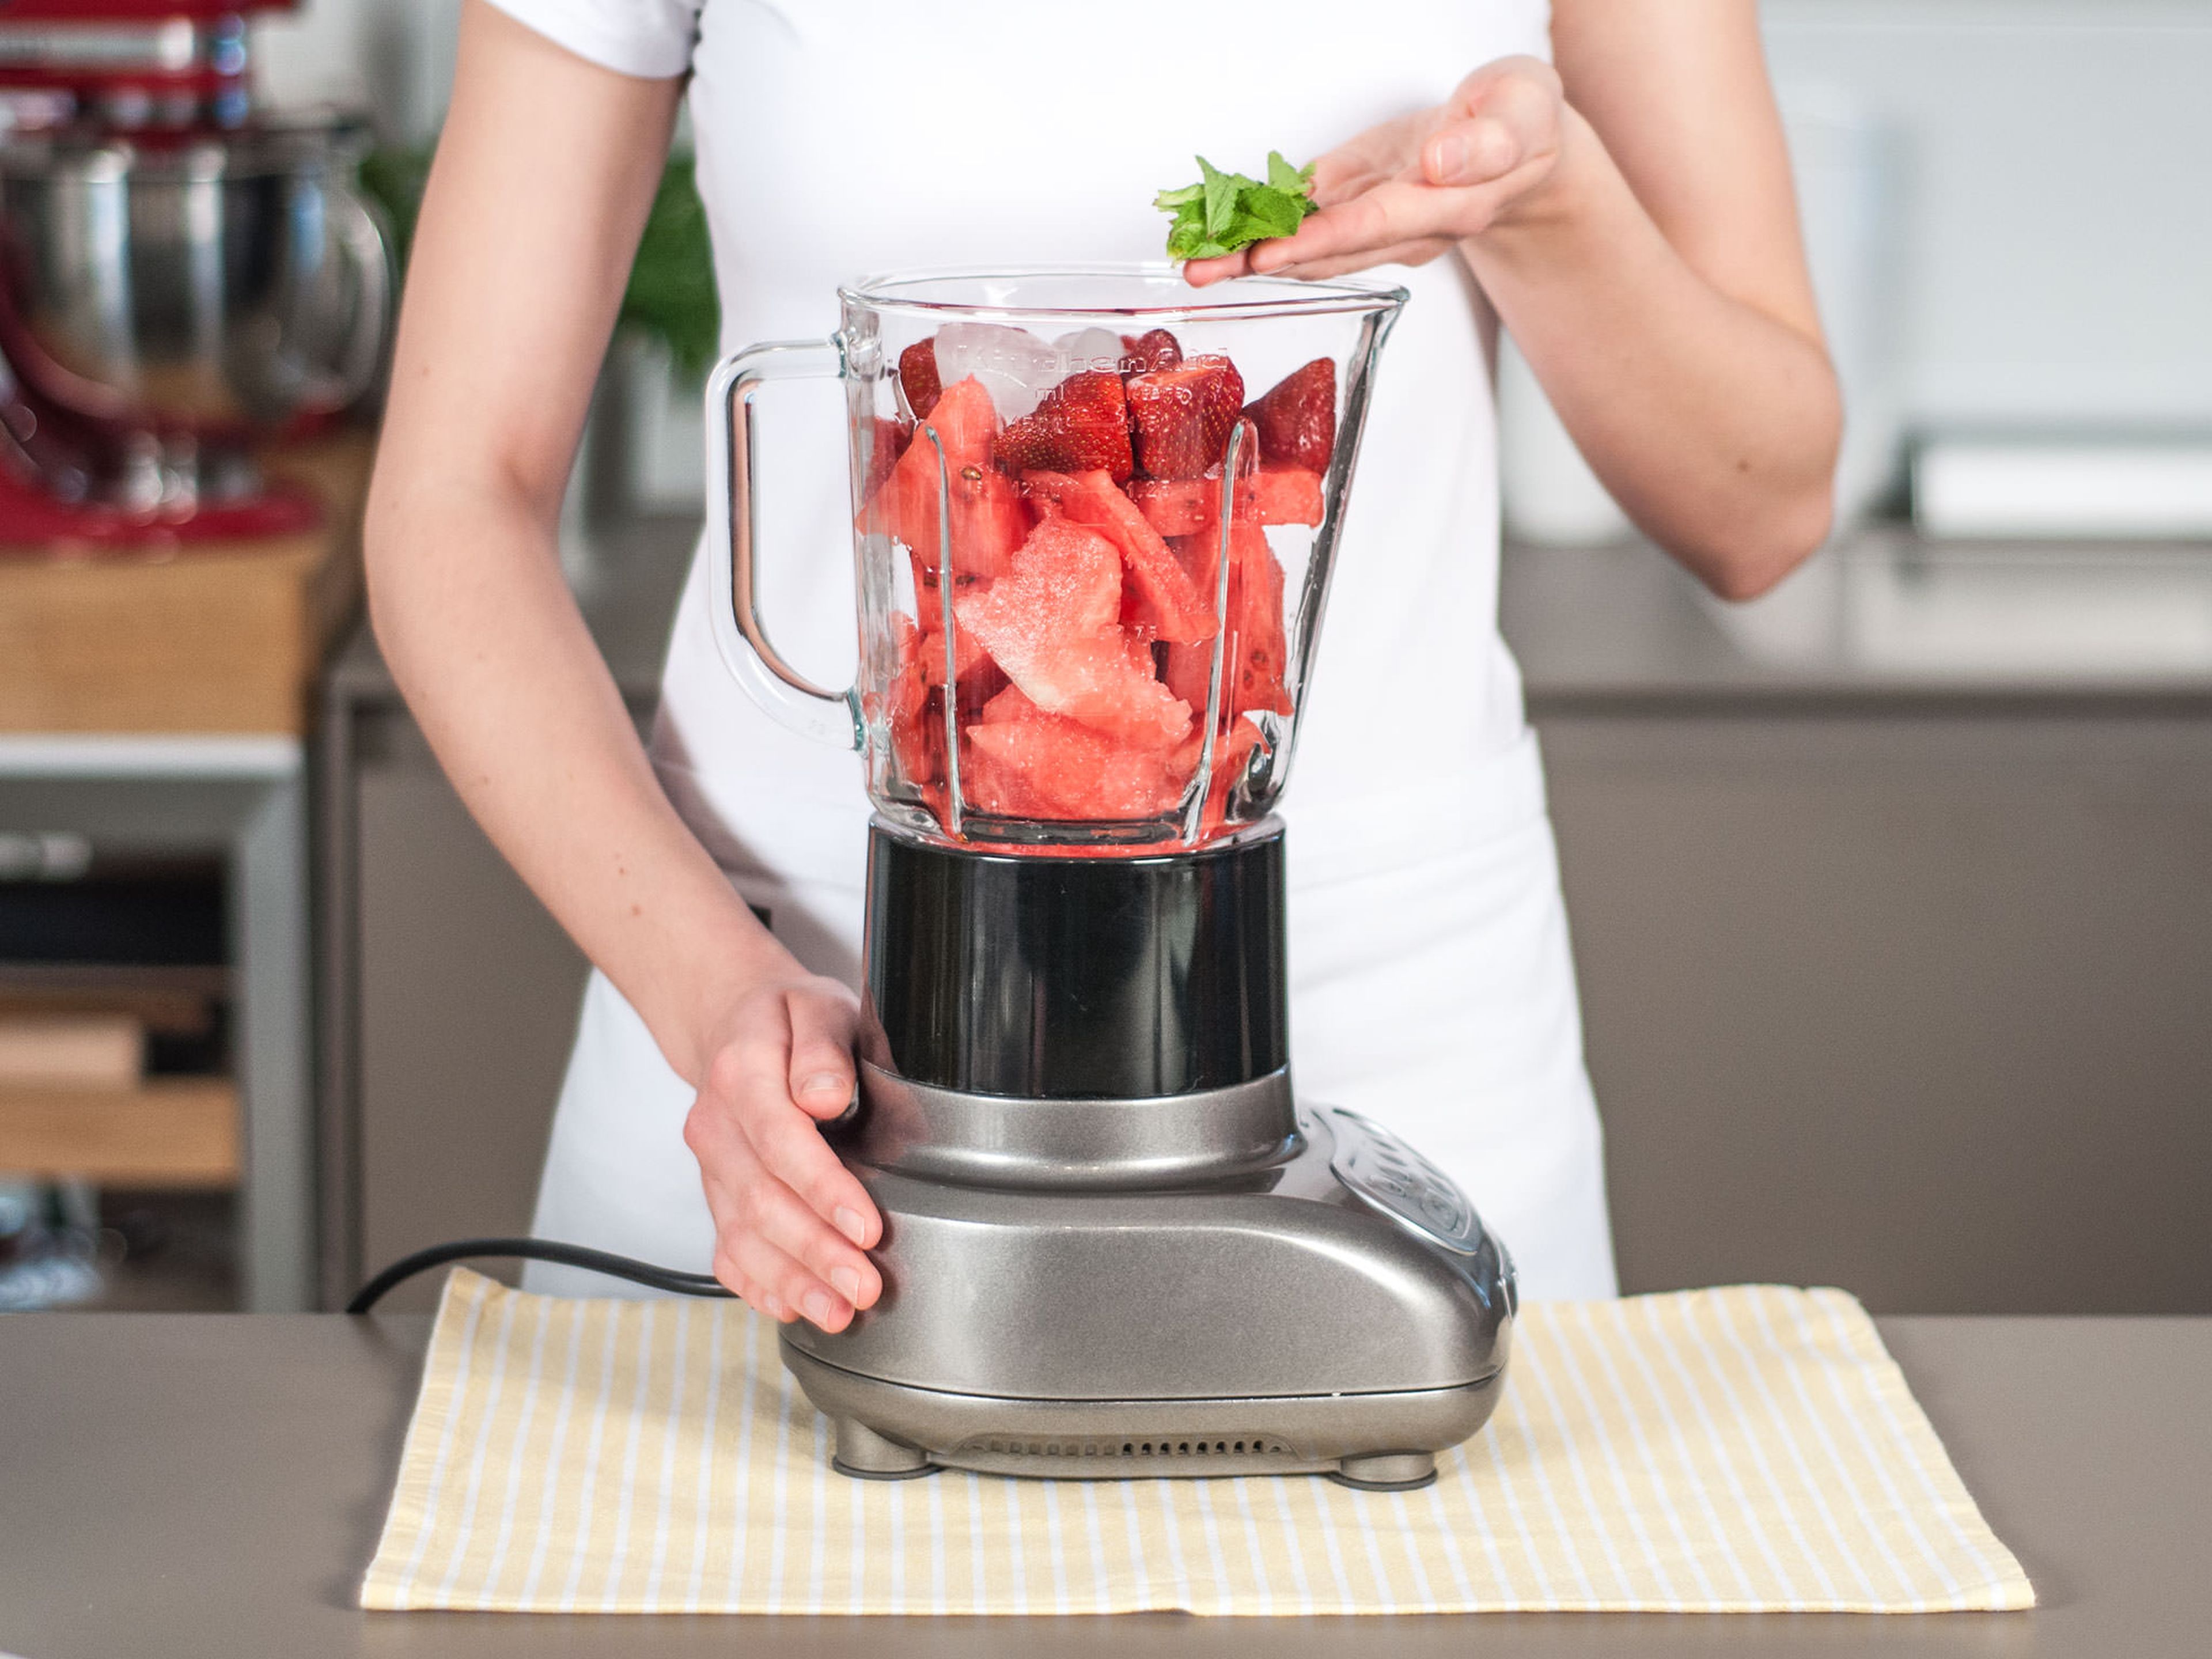 Add strawberry, watermelon, lime juice, ice cubes, and mint leaves to blender. Blend until smooth for approx. 2 – 3 min. Enjoy while cold.